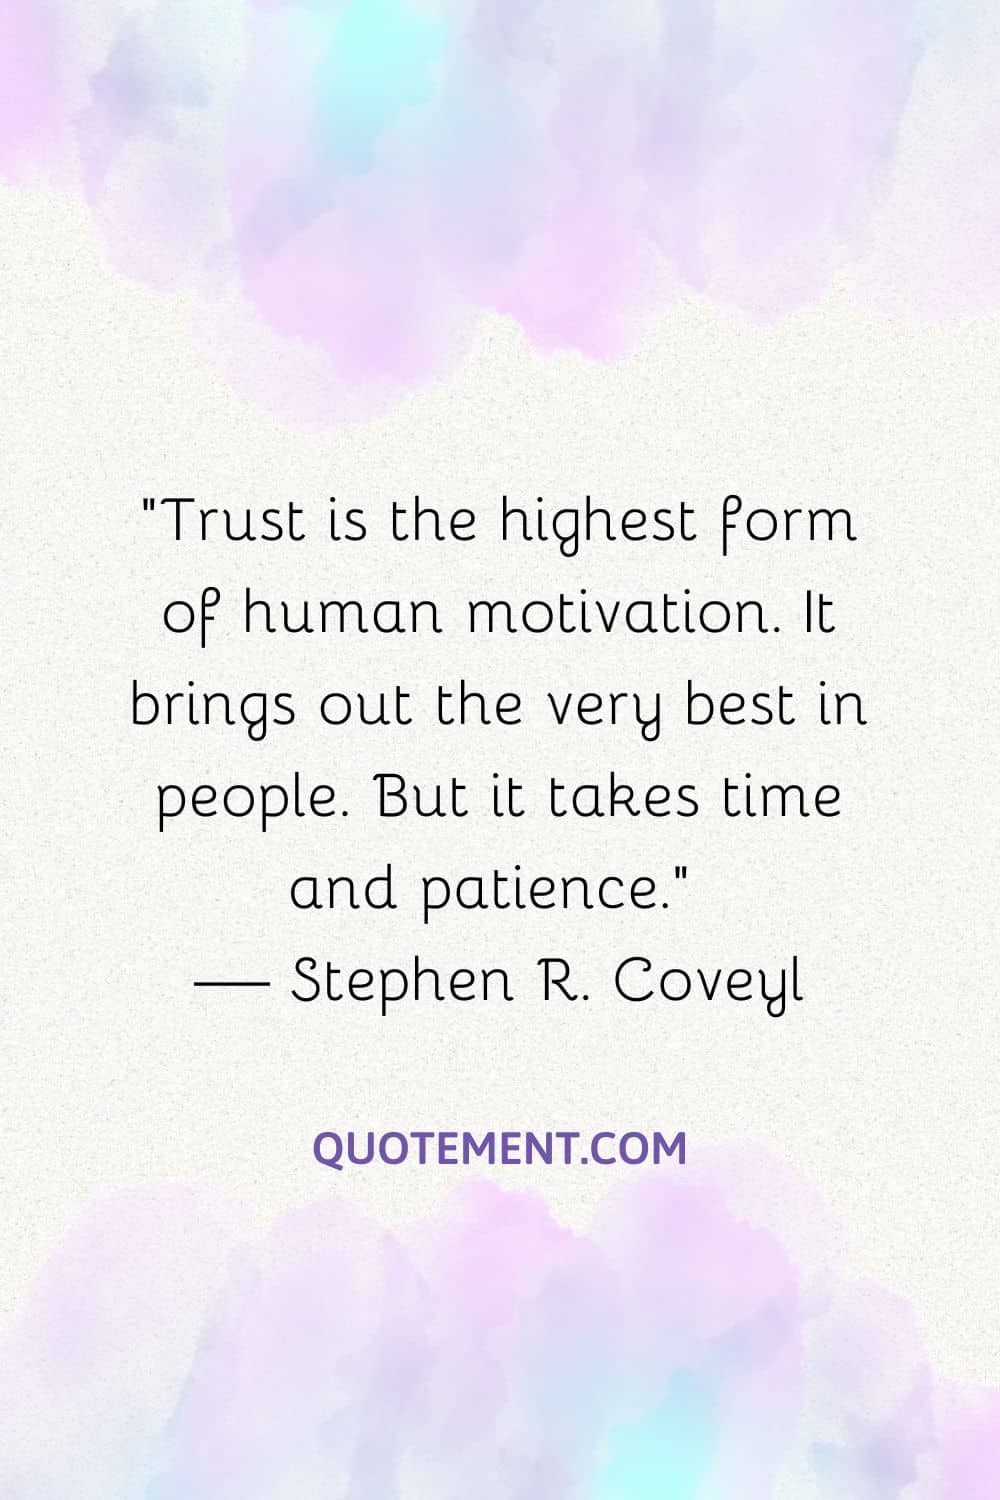 Trust is the highest form of human motivation. It brings out the very best in people.